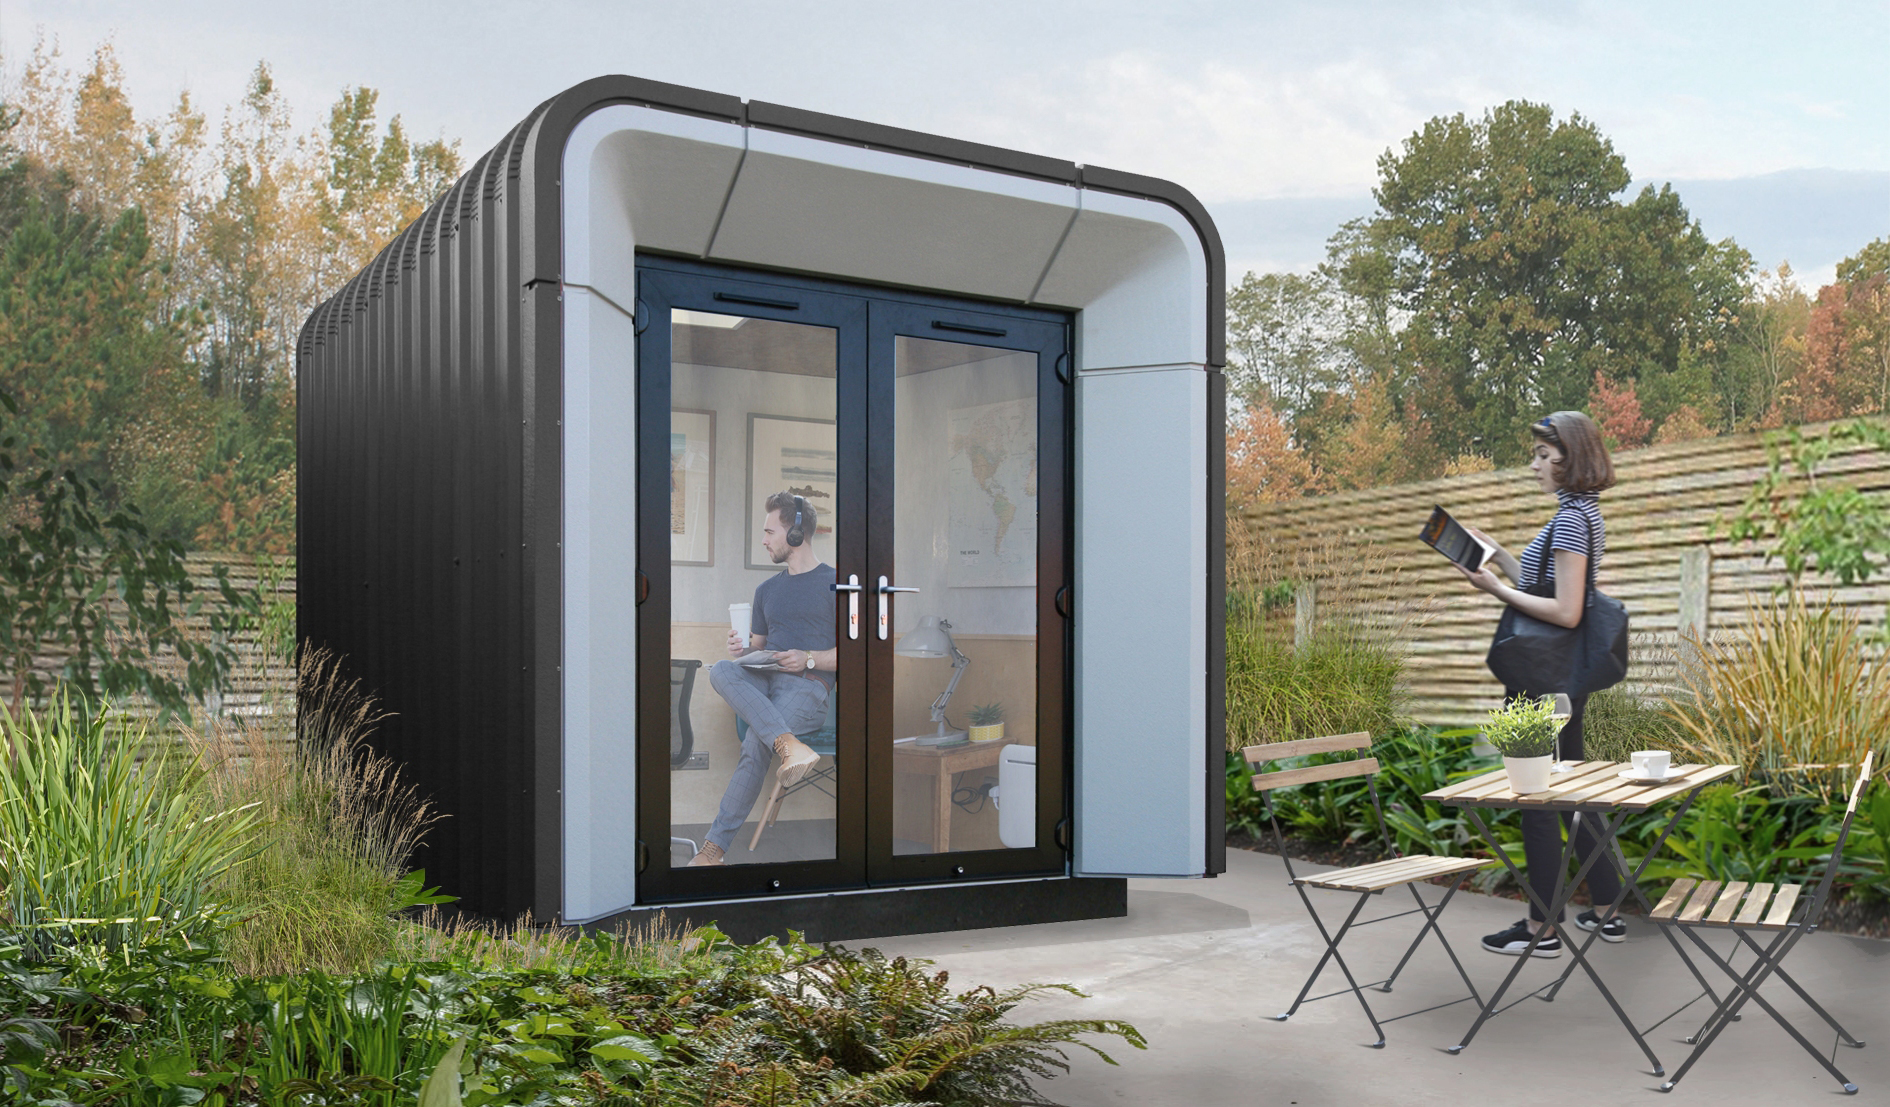 angled view of Rumipod Pico garden office, finished in an Anthracite colour, with man sitting inside and woman standing outside